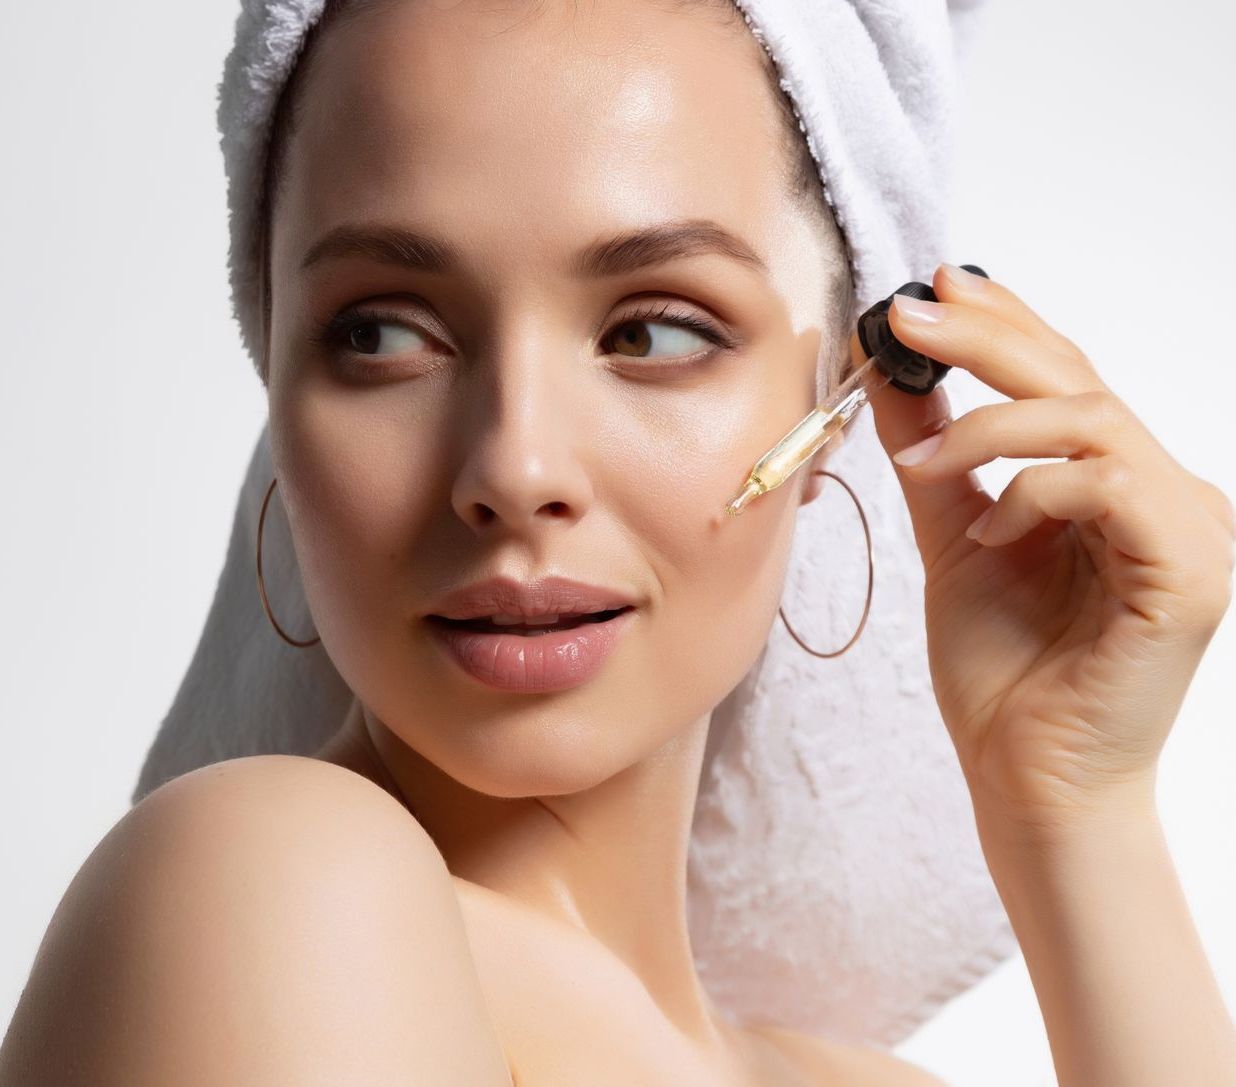 A woman with a towel wrapped around her head is applying a serum to her face.